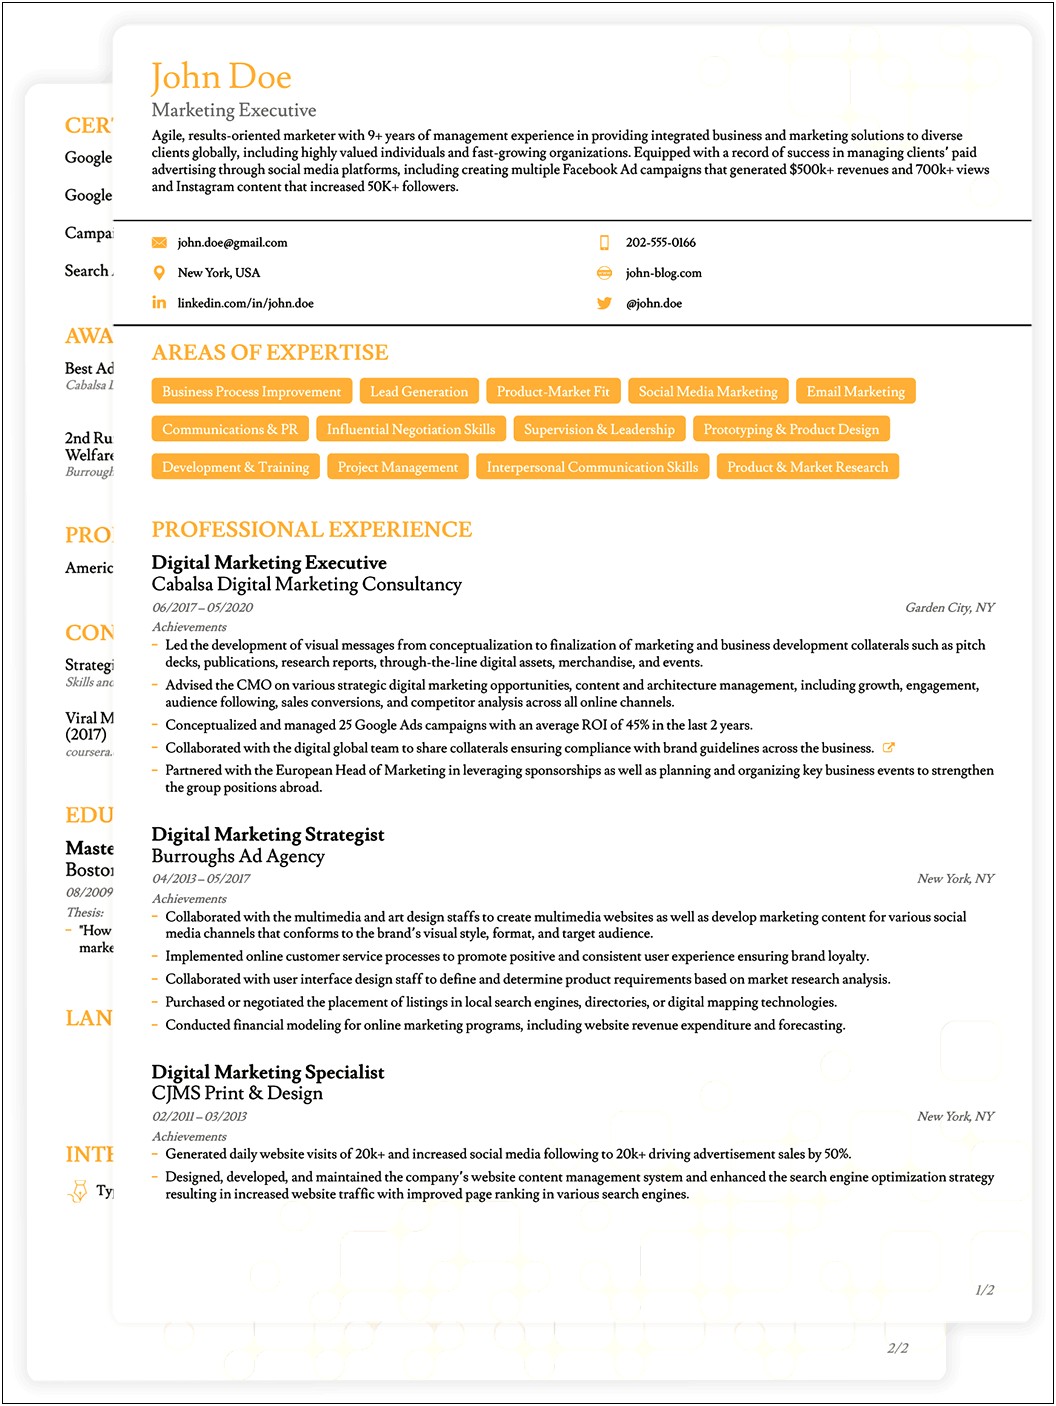 Structure Of Resume For Job